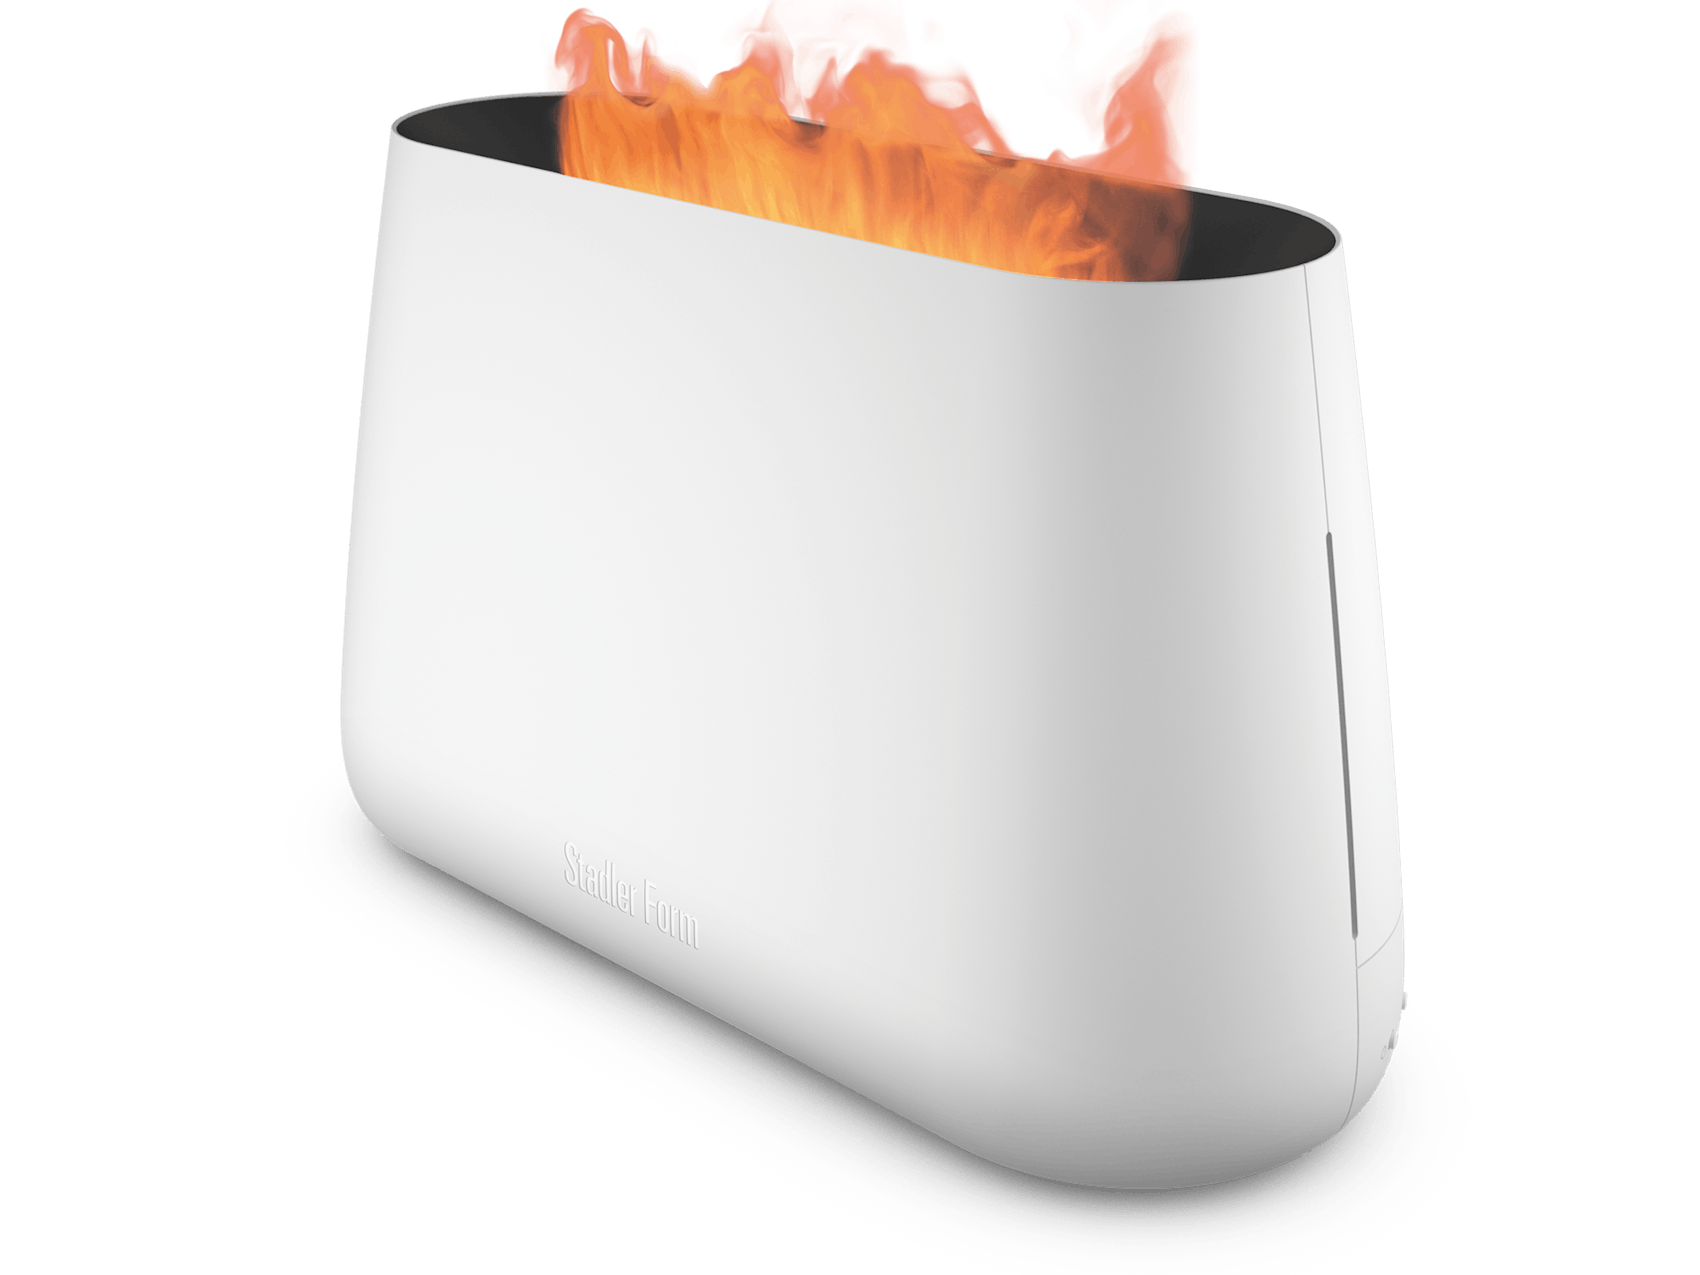 Ben humidifier by Stadler Form in white as perspective view